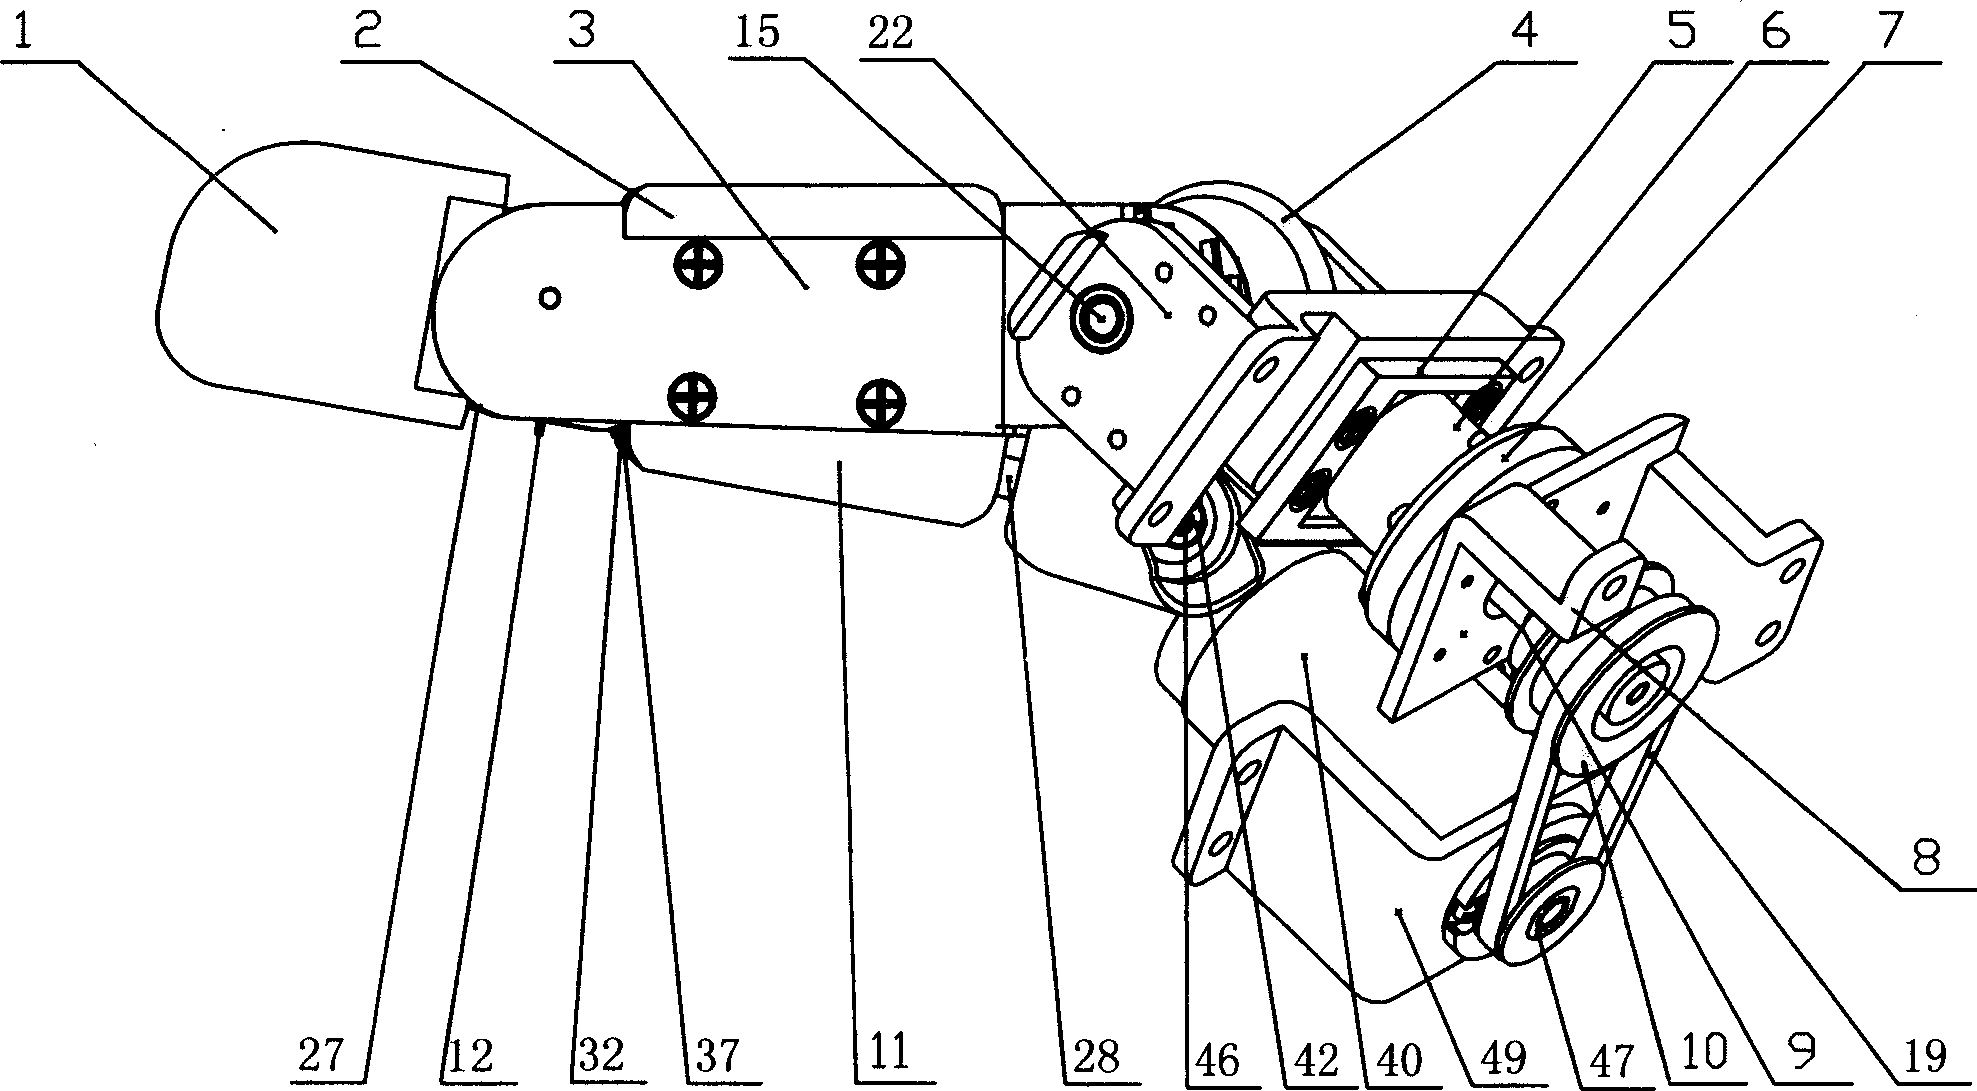 Thumb mechanism of underactuated self-adaptive hand prosthesis